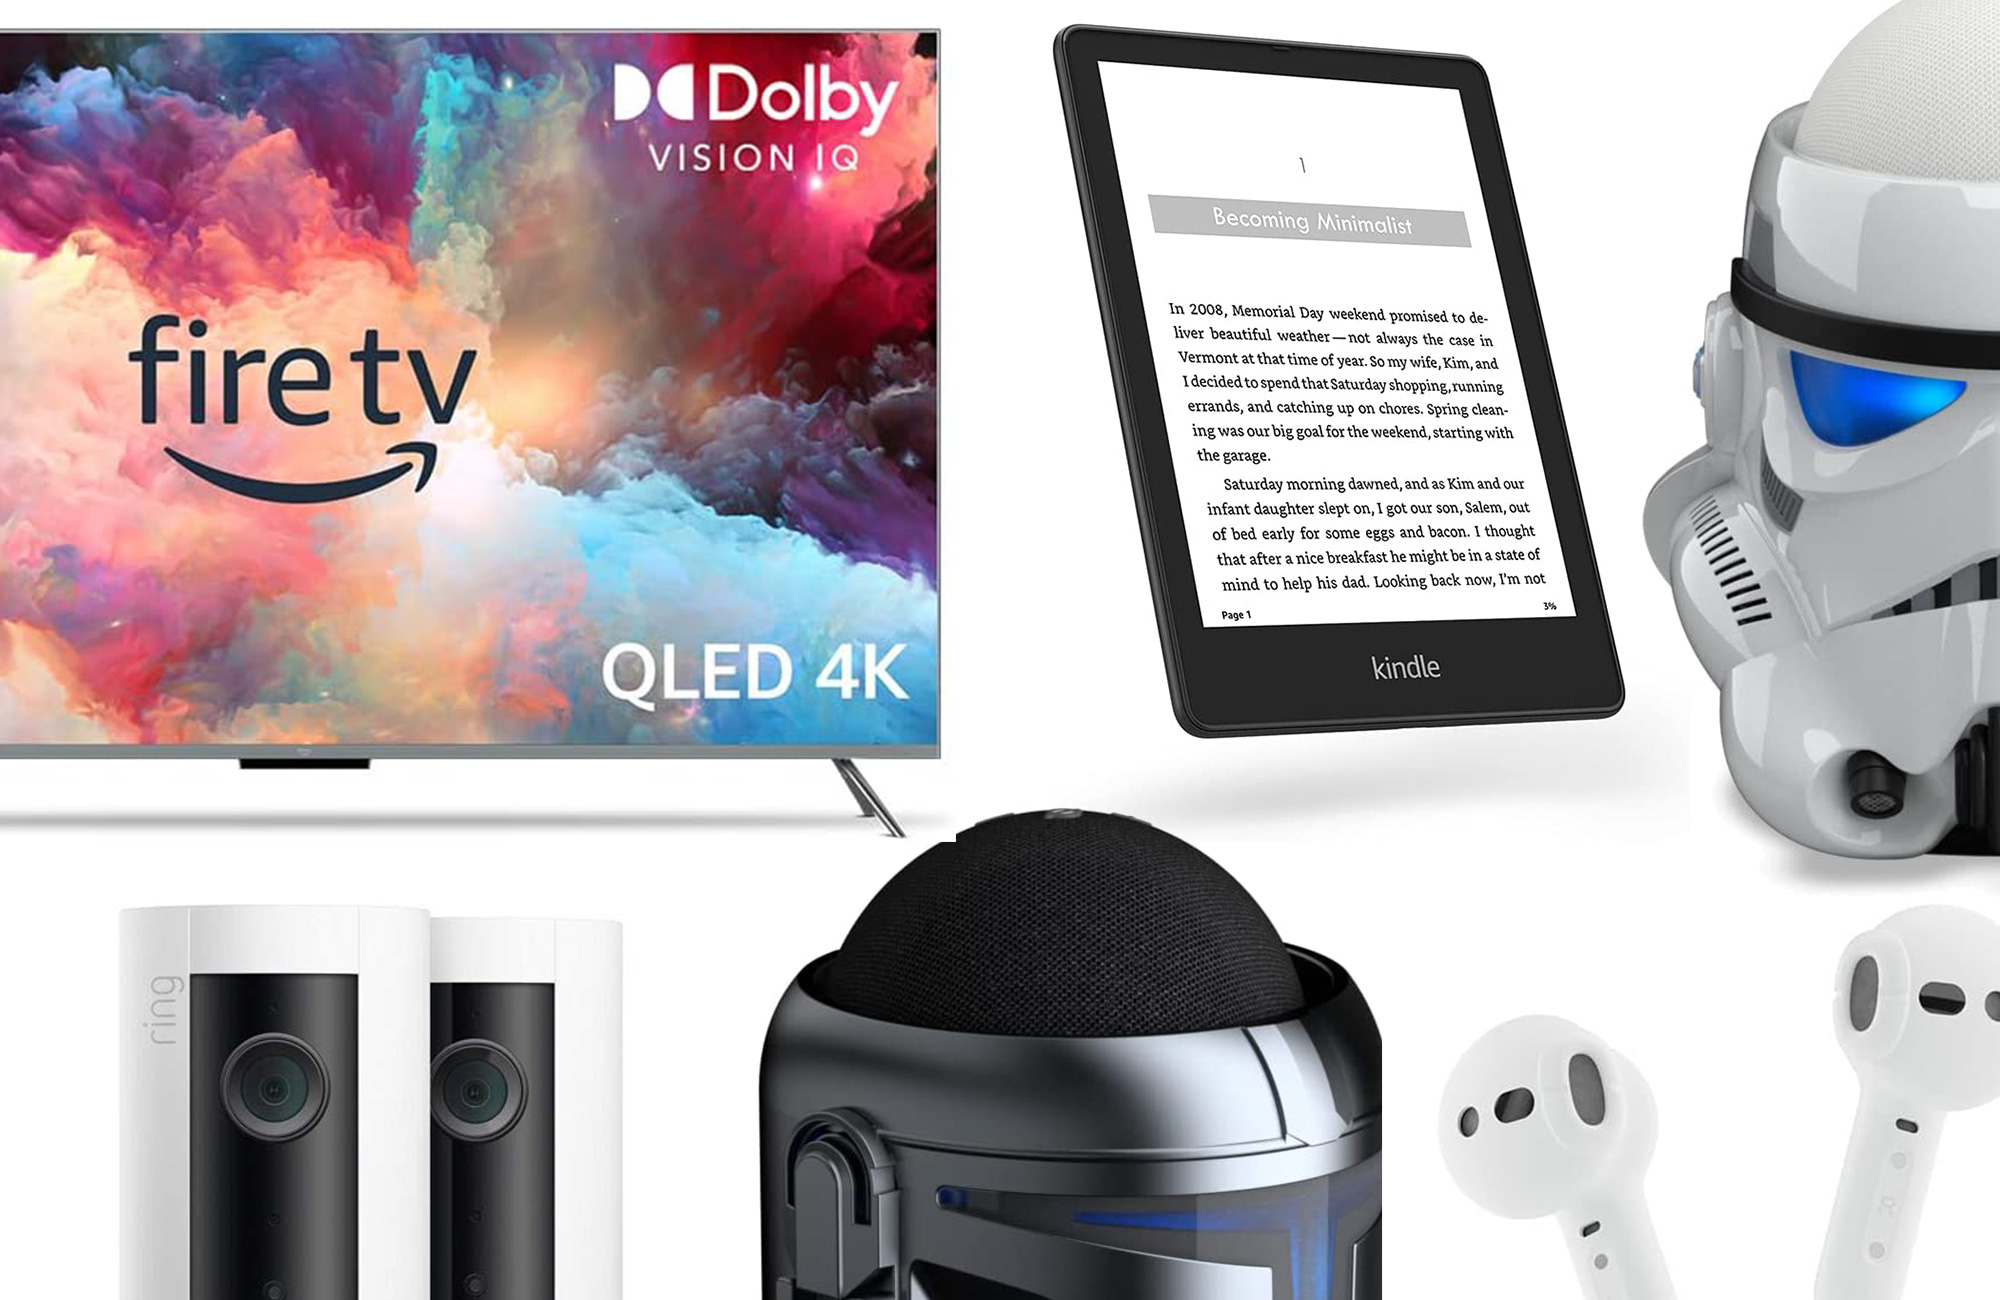 Amazon’s early Prime Day deals have already started with Kindles, Fire TVs, and more